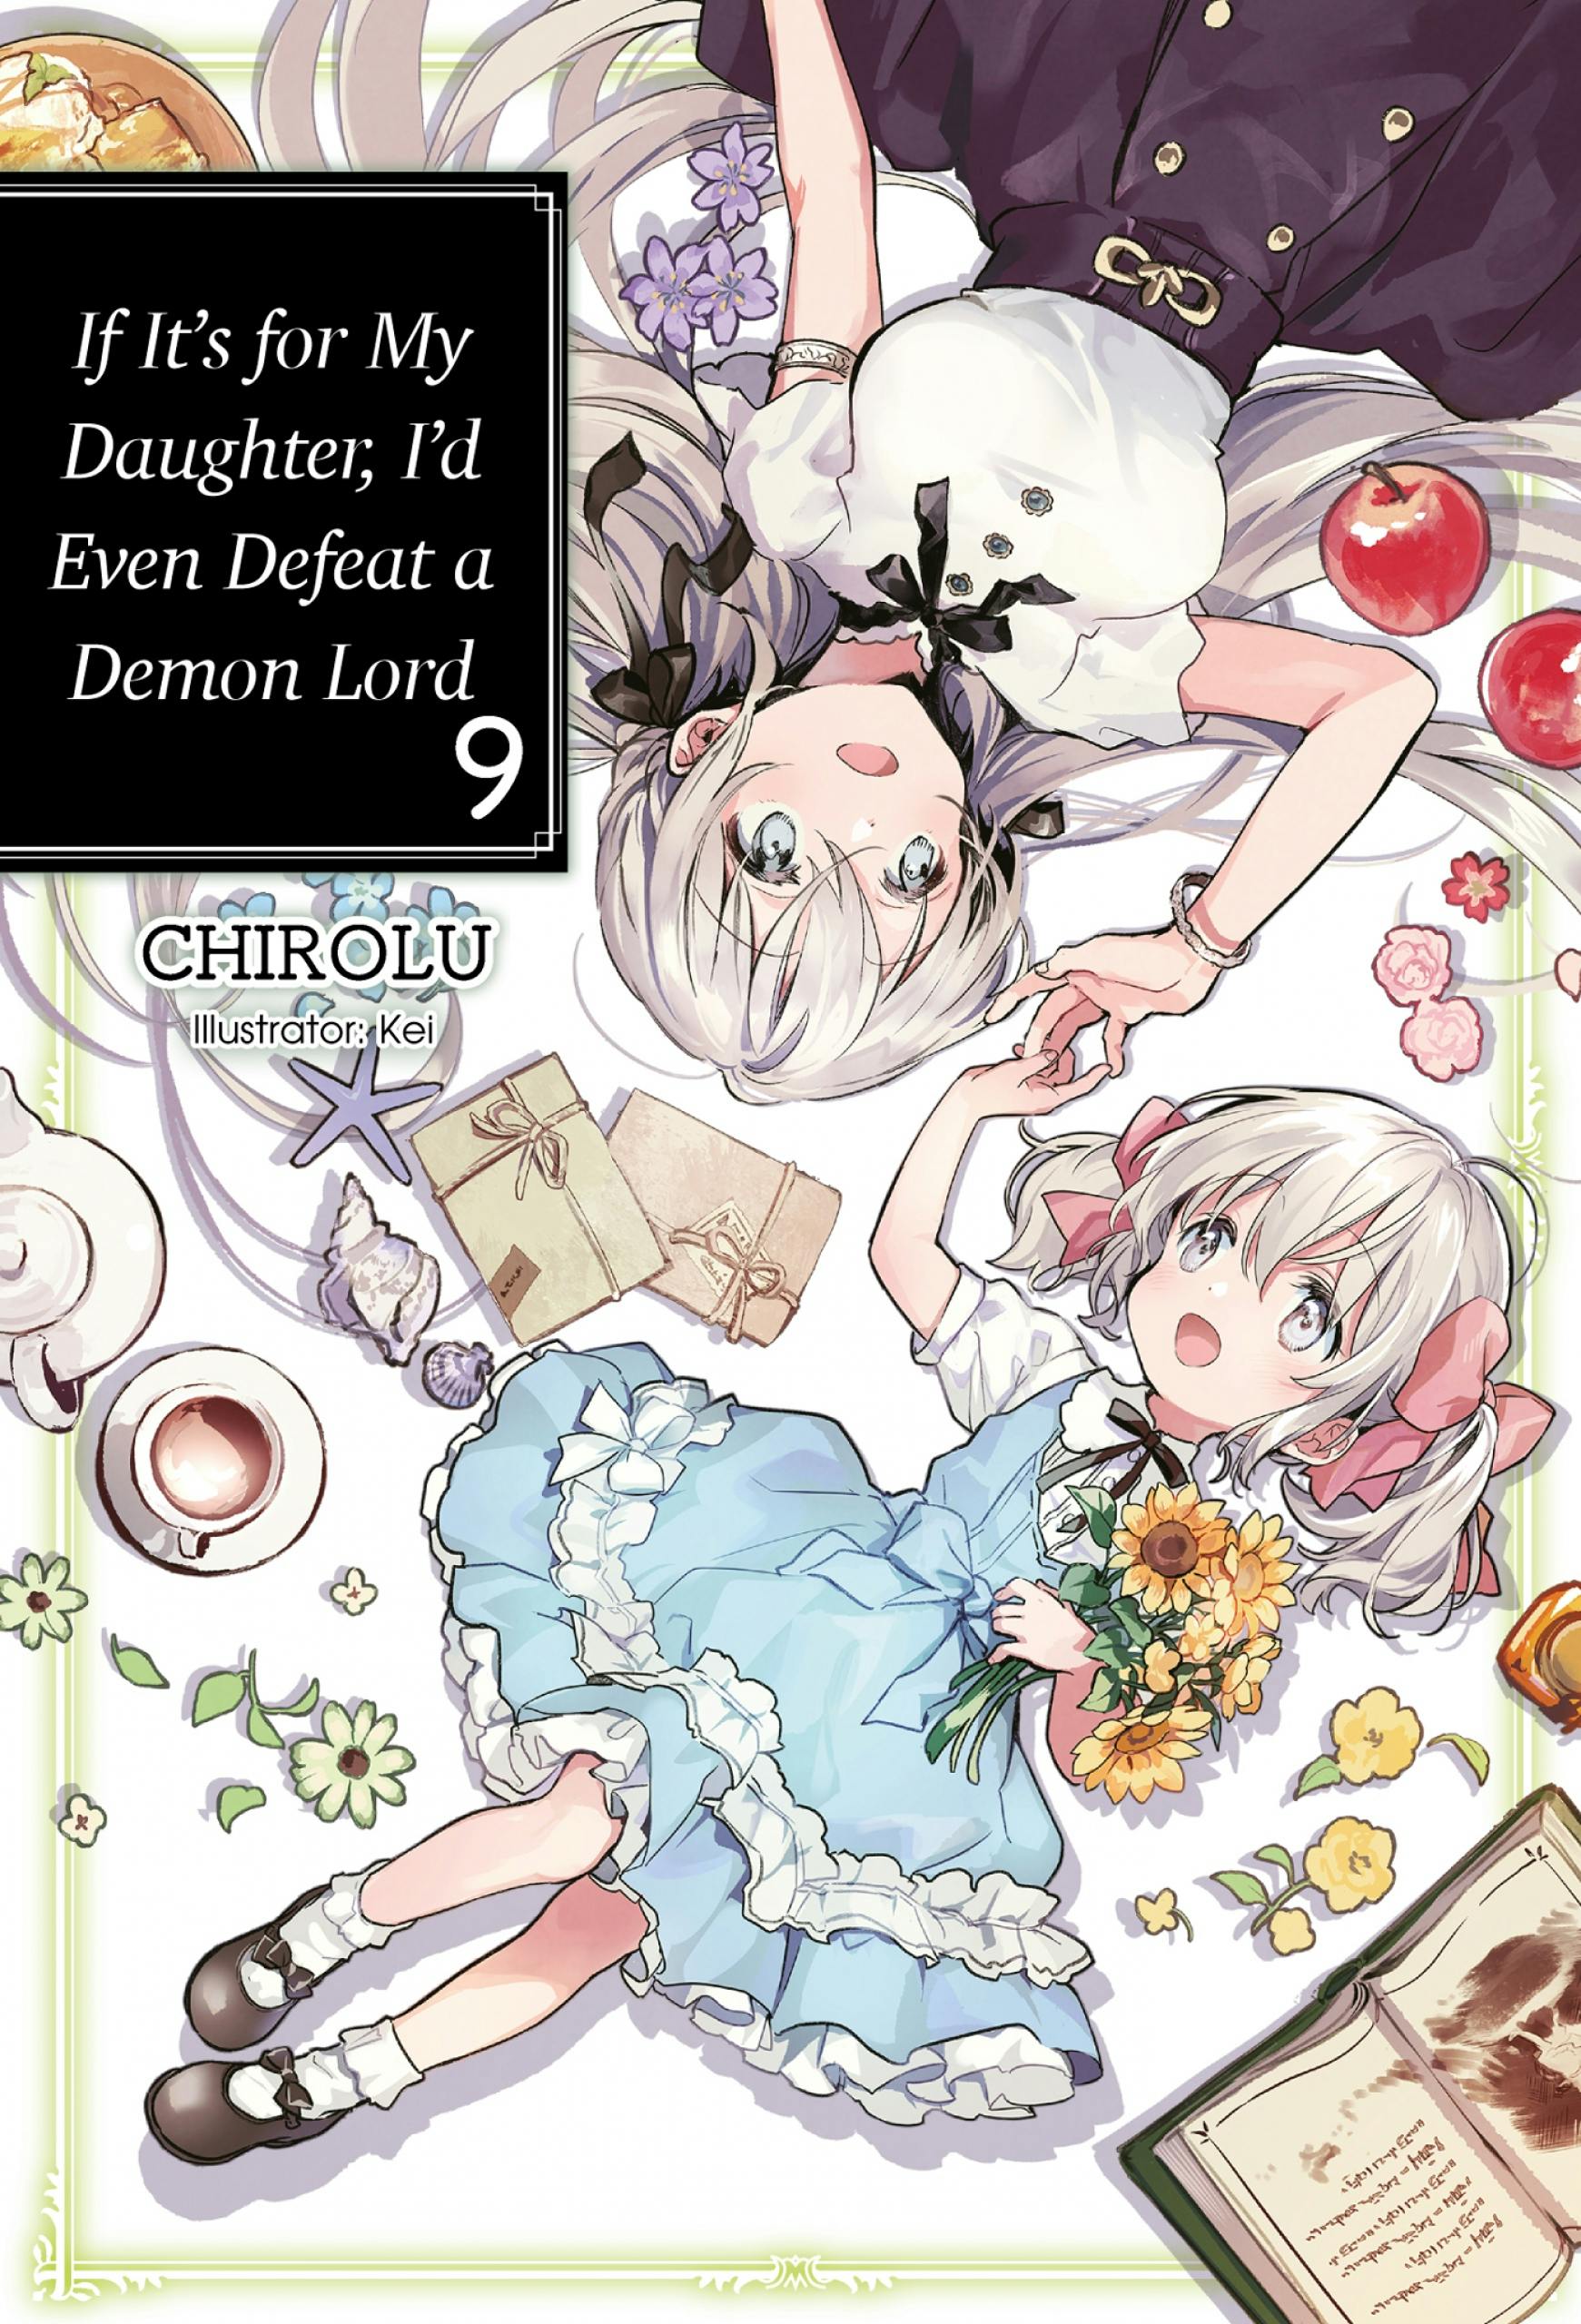 If It’s for My Daughter, I’d Even Defeat a Demon Lord: Volume 9 - CHIROLU